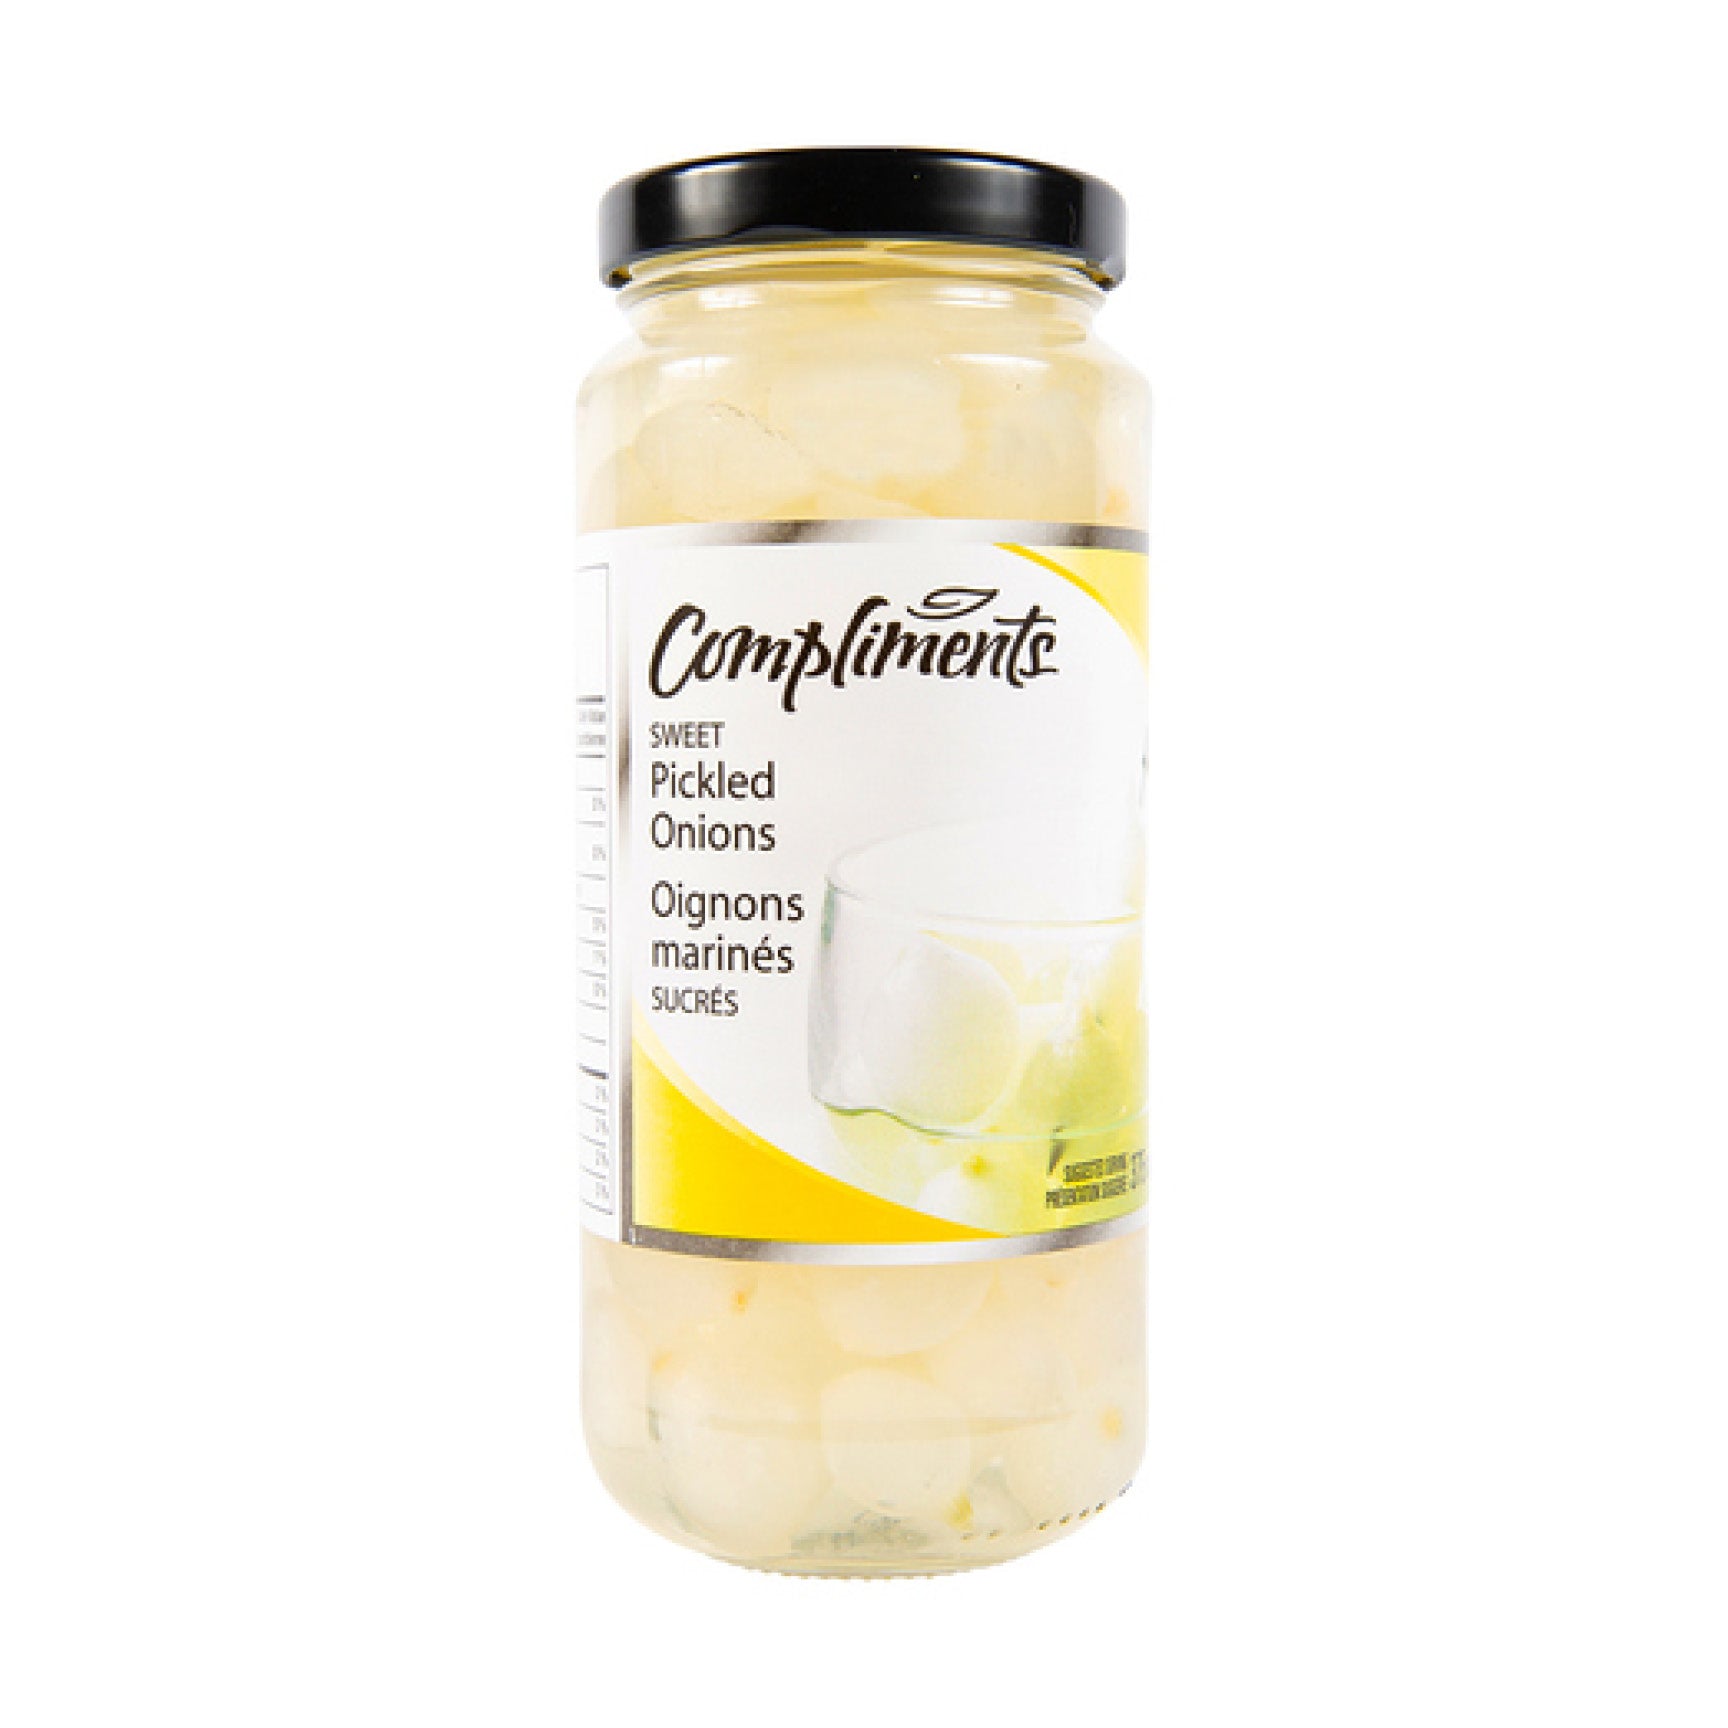 Compliments Sweet Pickled Onions, 375 mL